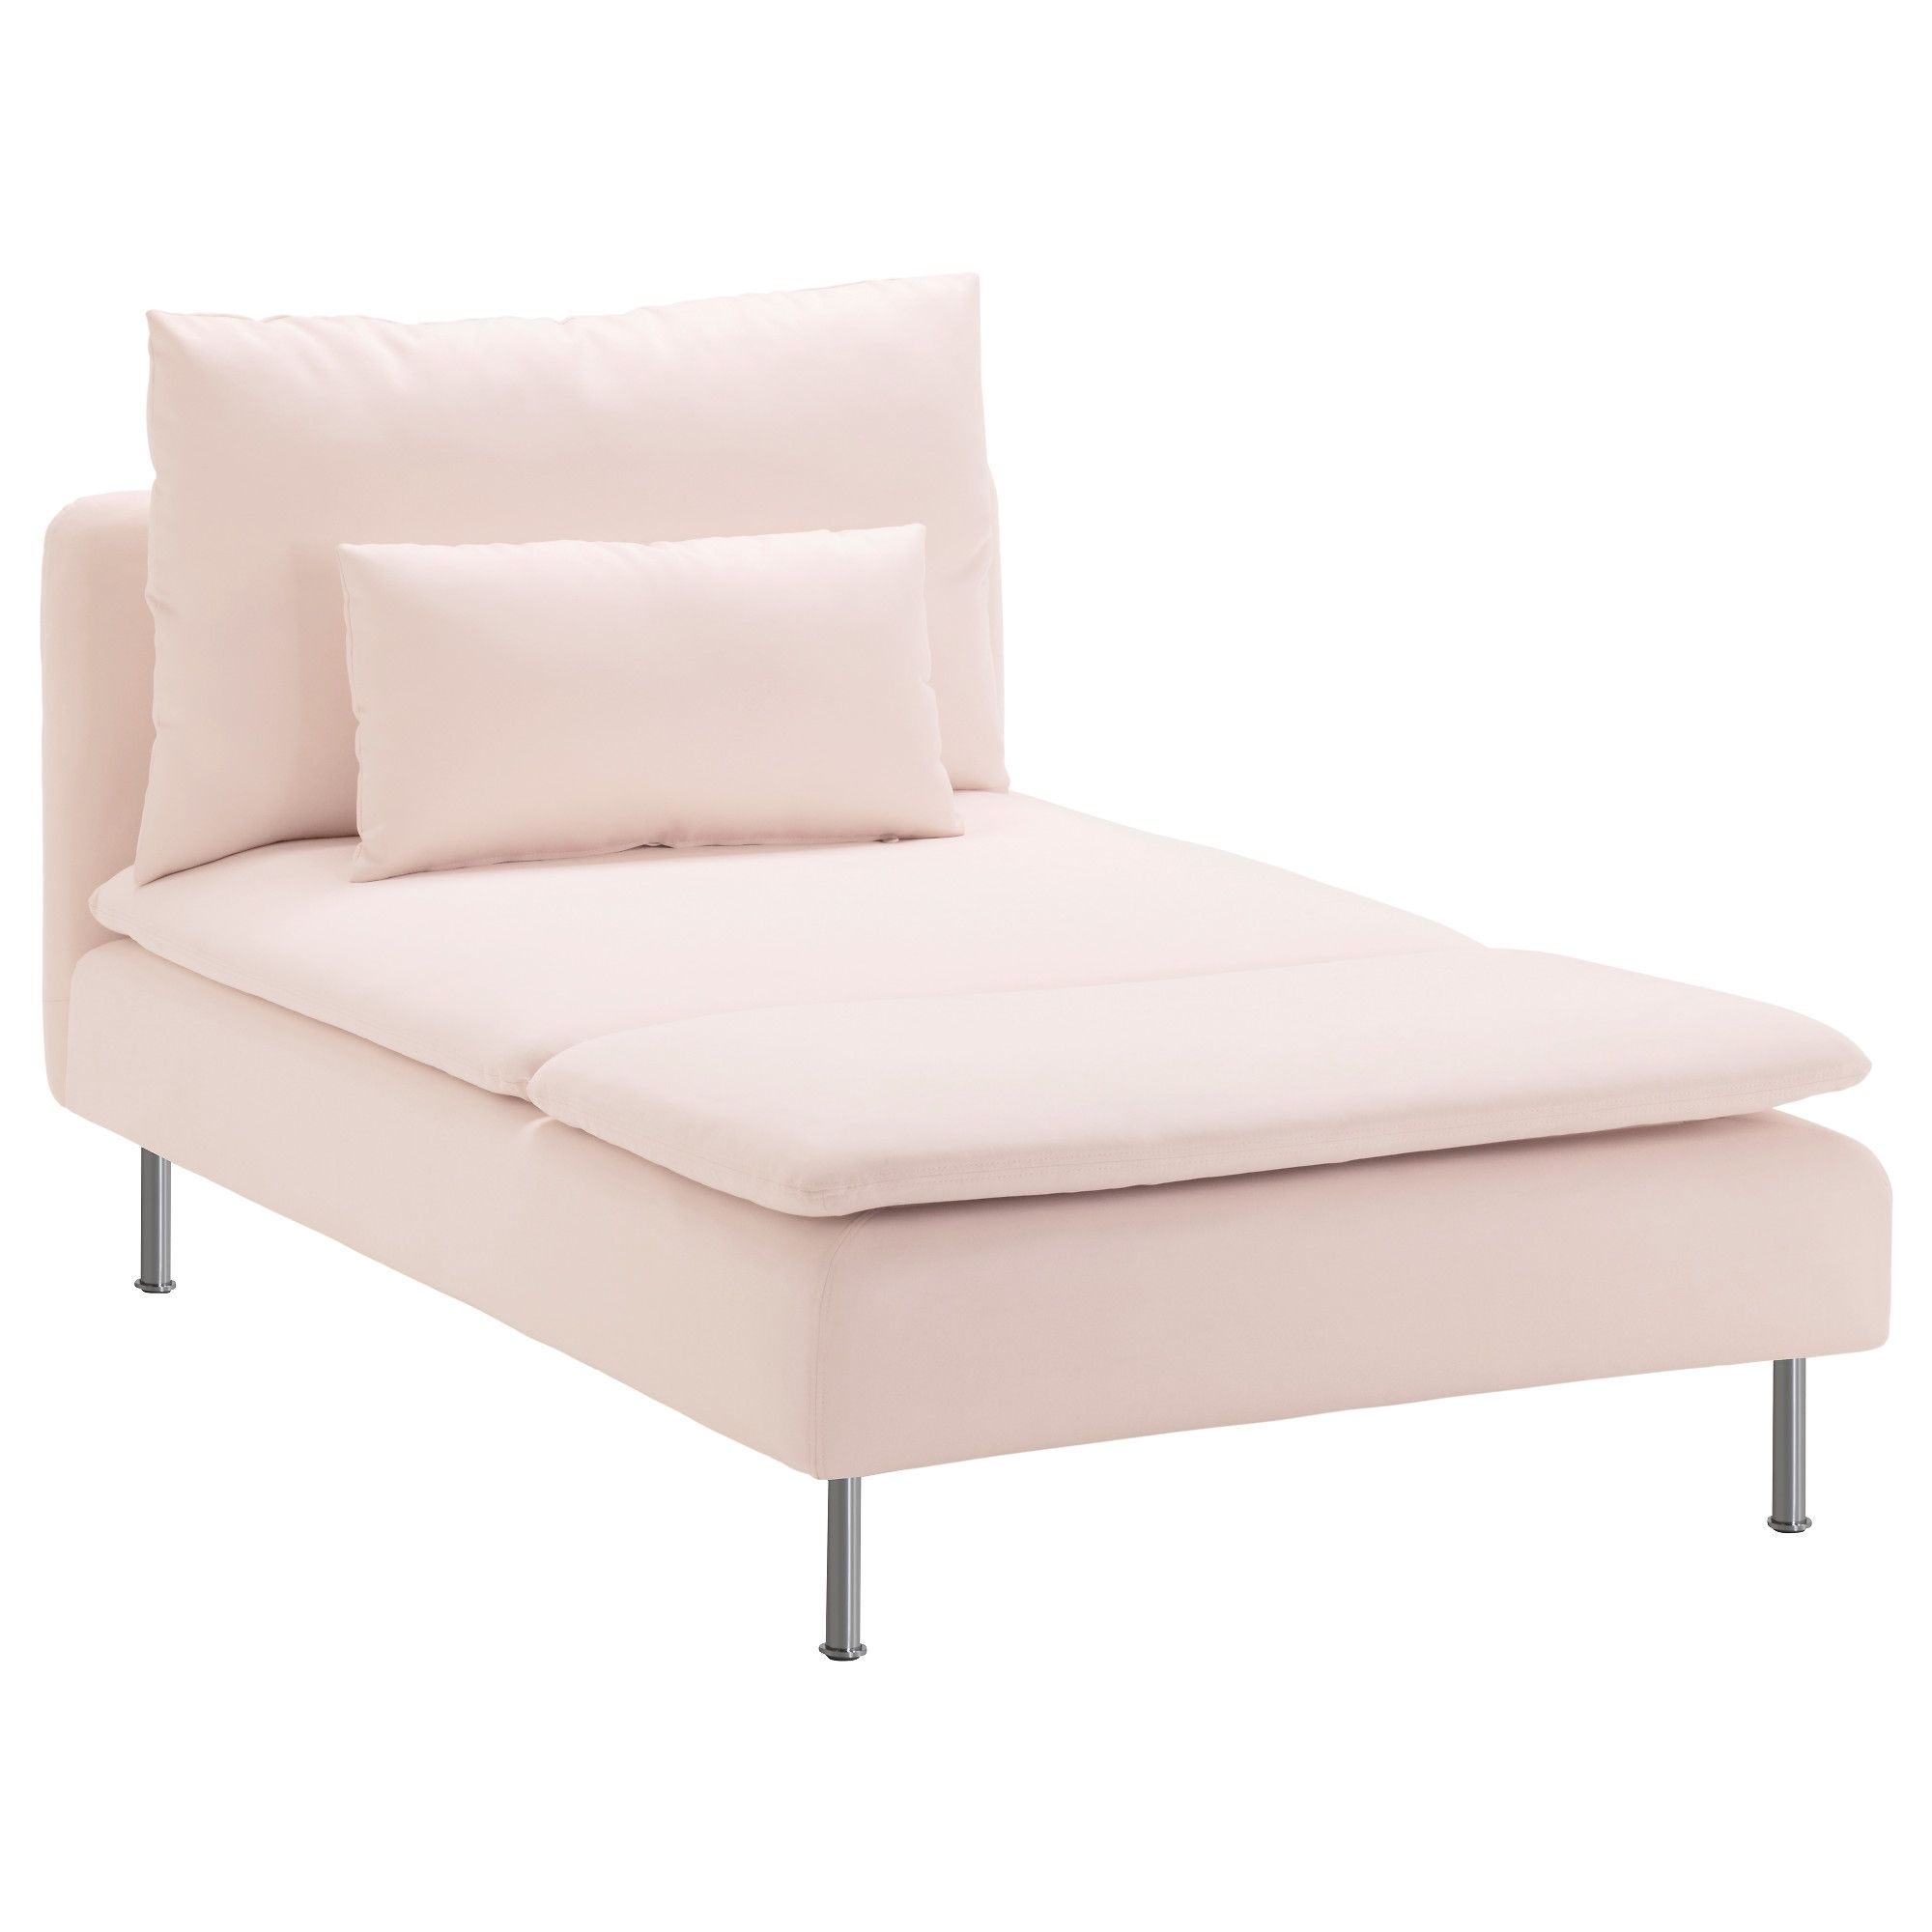 Recent Söderhamn Chaise – Samsta Light Pink – Ikea Pertaining To Pink Chaise Lounges (View 13 of 15)